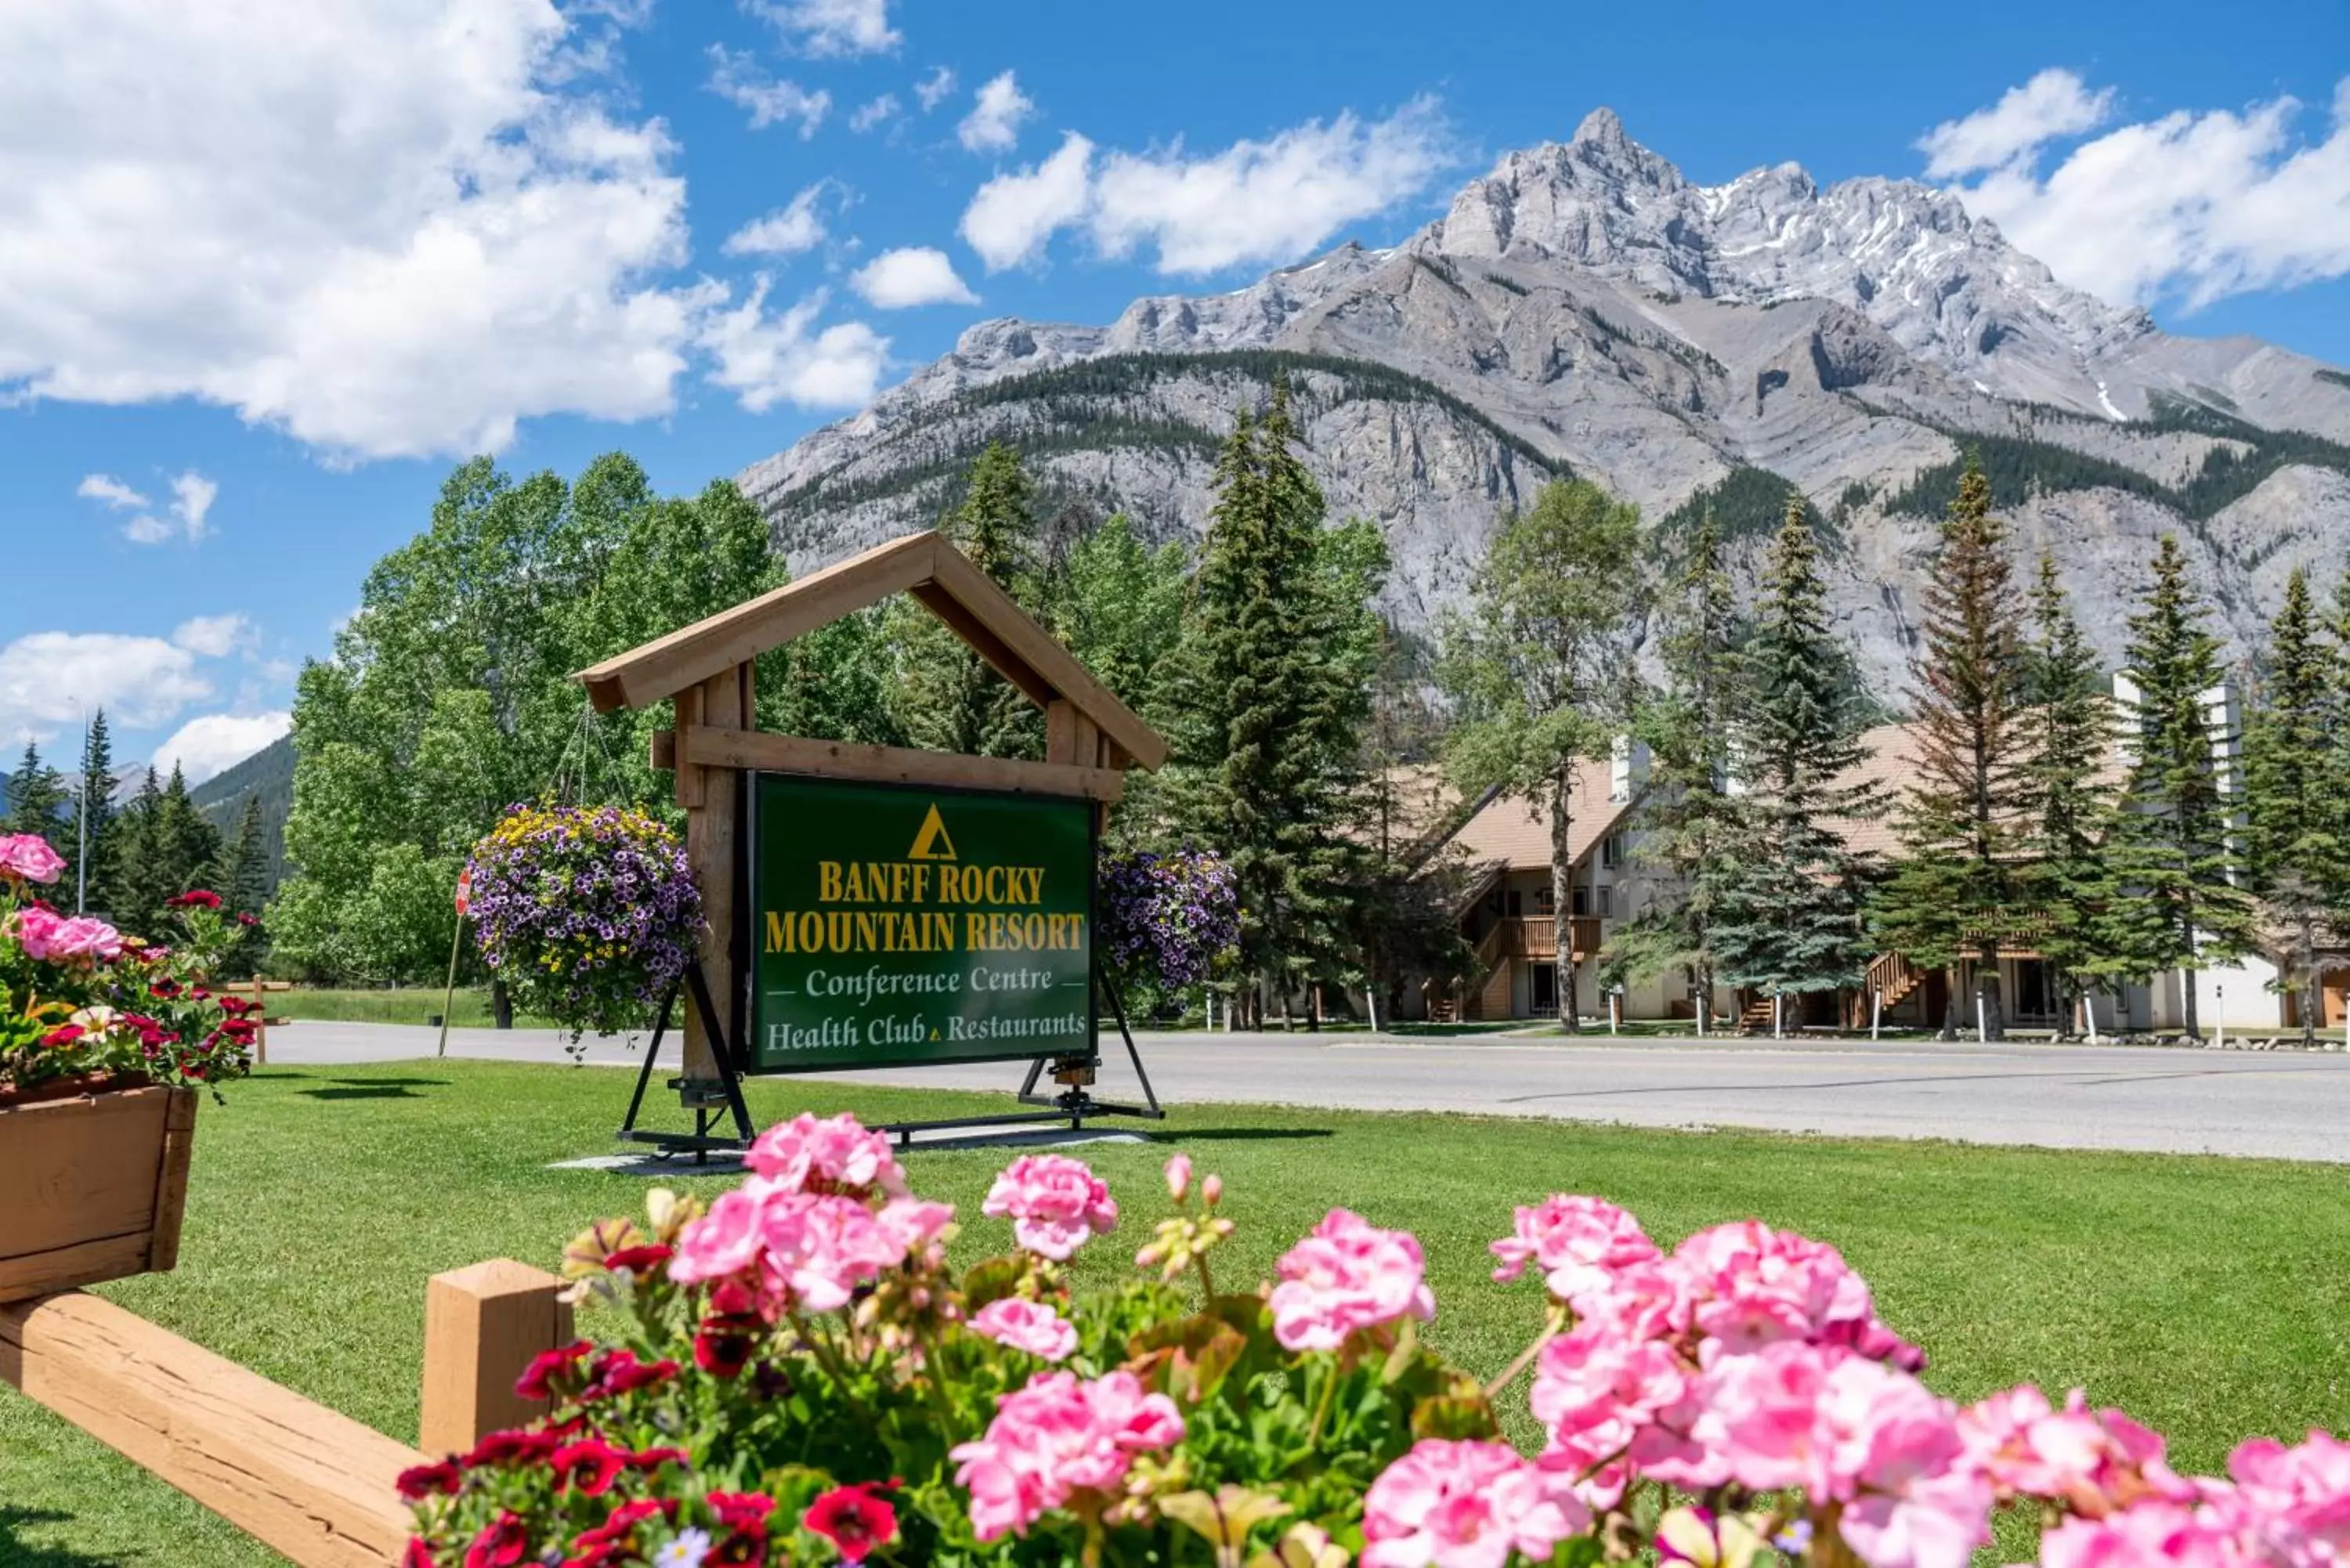 Property logo or sign in Banff Rocky Mountain Resort